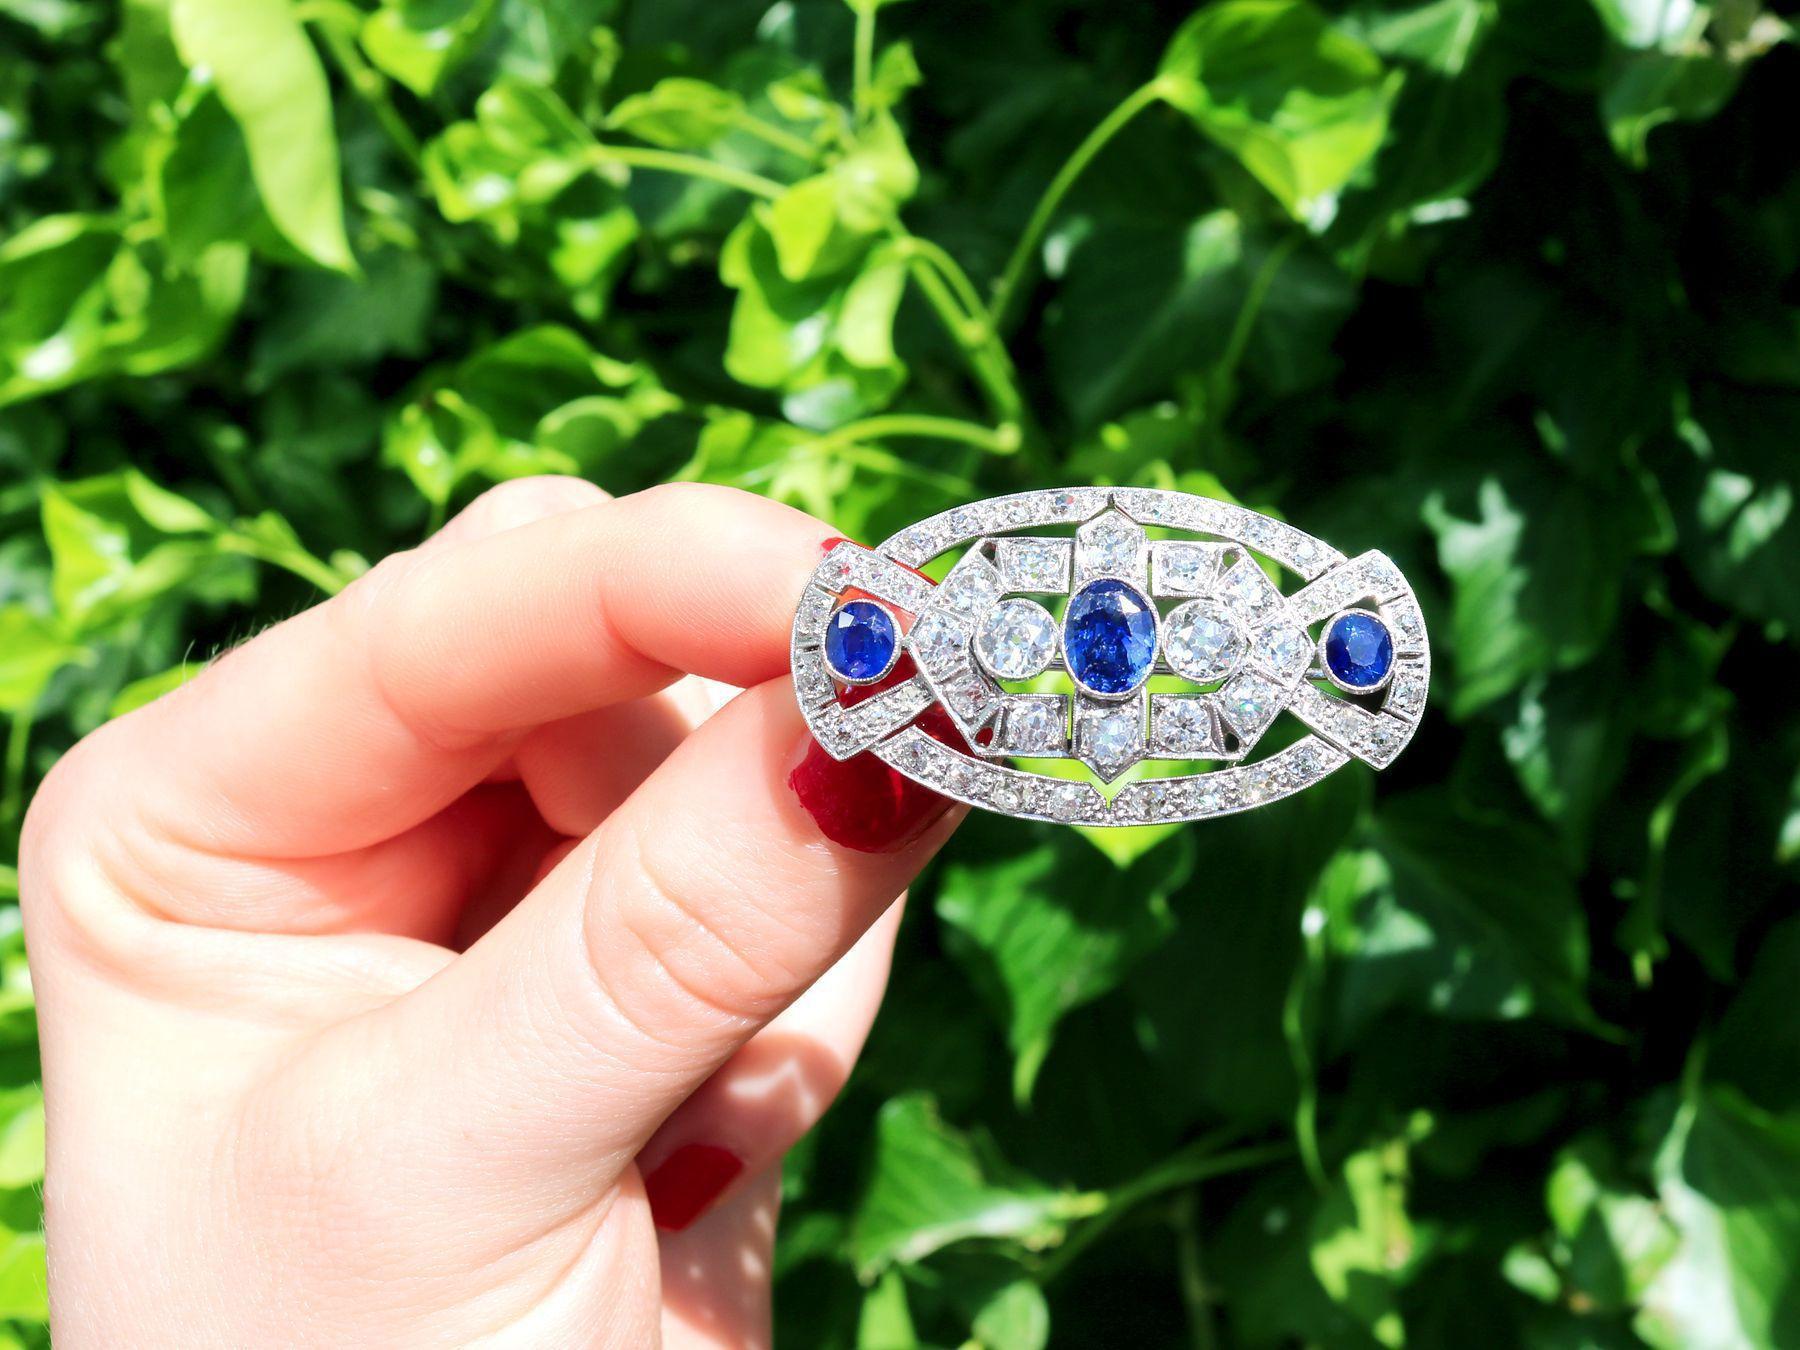 A stunning antique Art Deco 5.68 carat diamond and 2.35 carat sapphire, platinum brooch; part of our diverse antique jewelry and estate jewelry collections.

This stunning, fine and impressive antique sapphire and diamond brooch has been crafted in